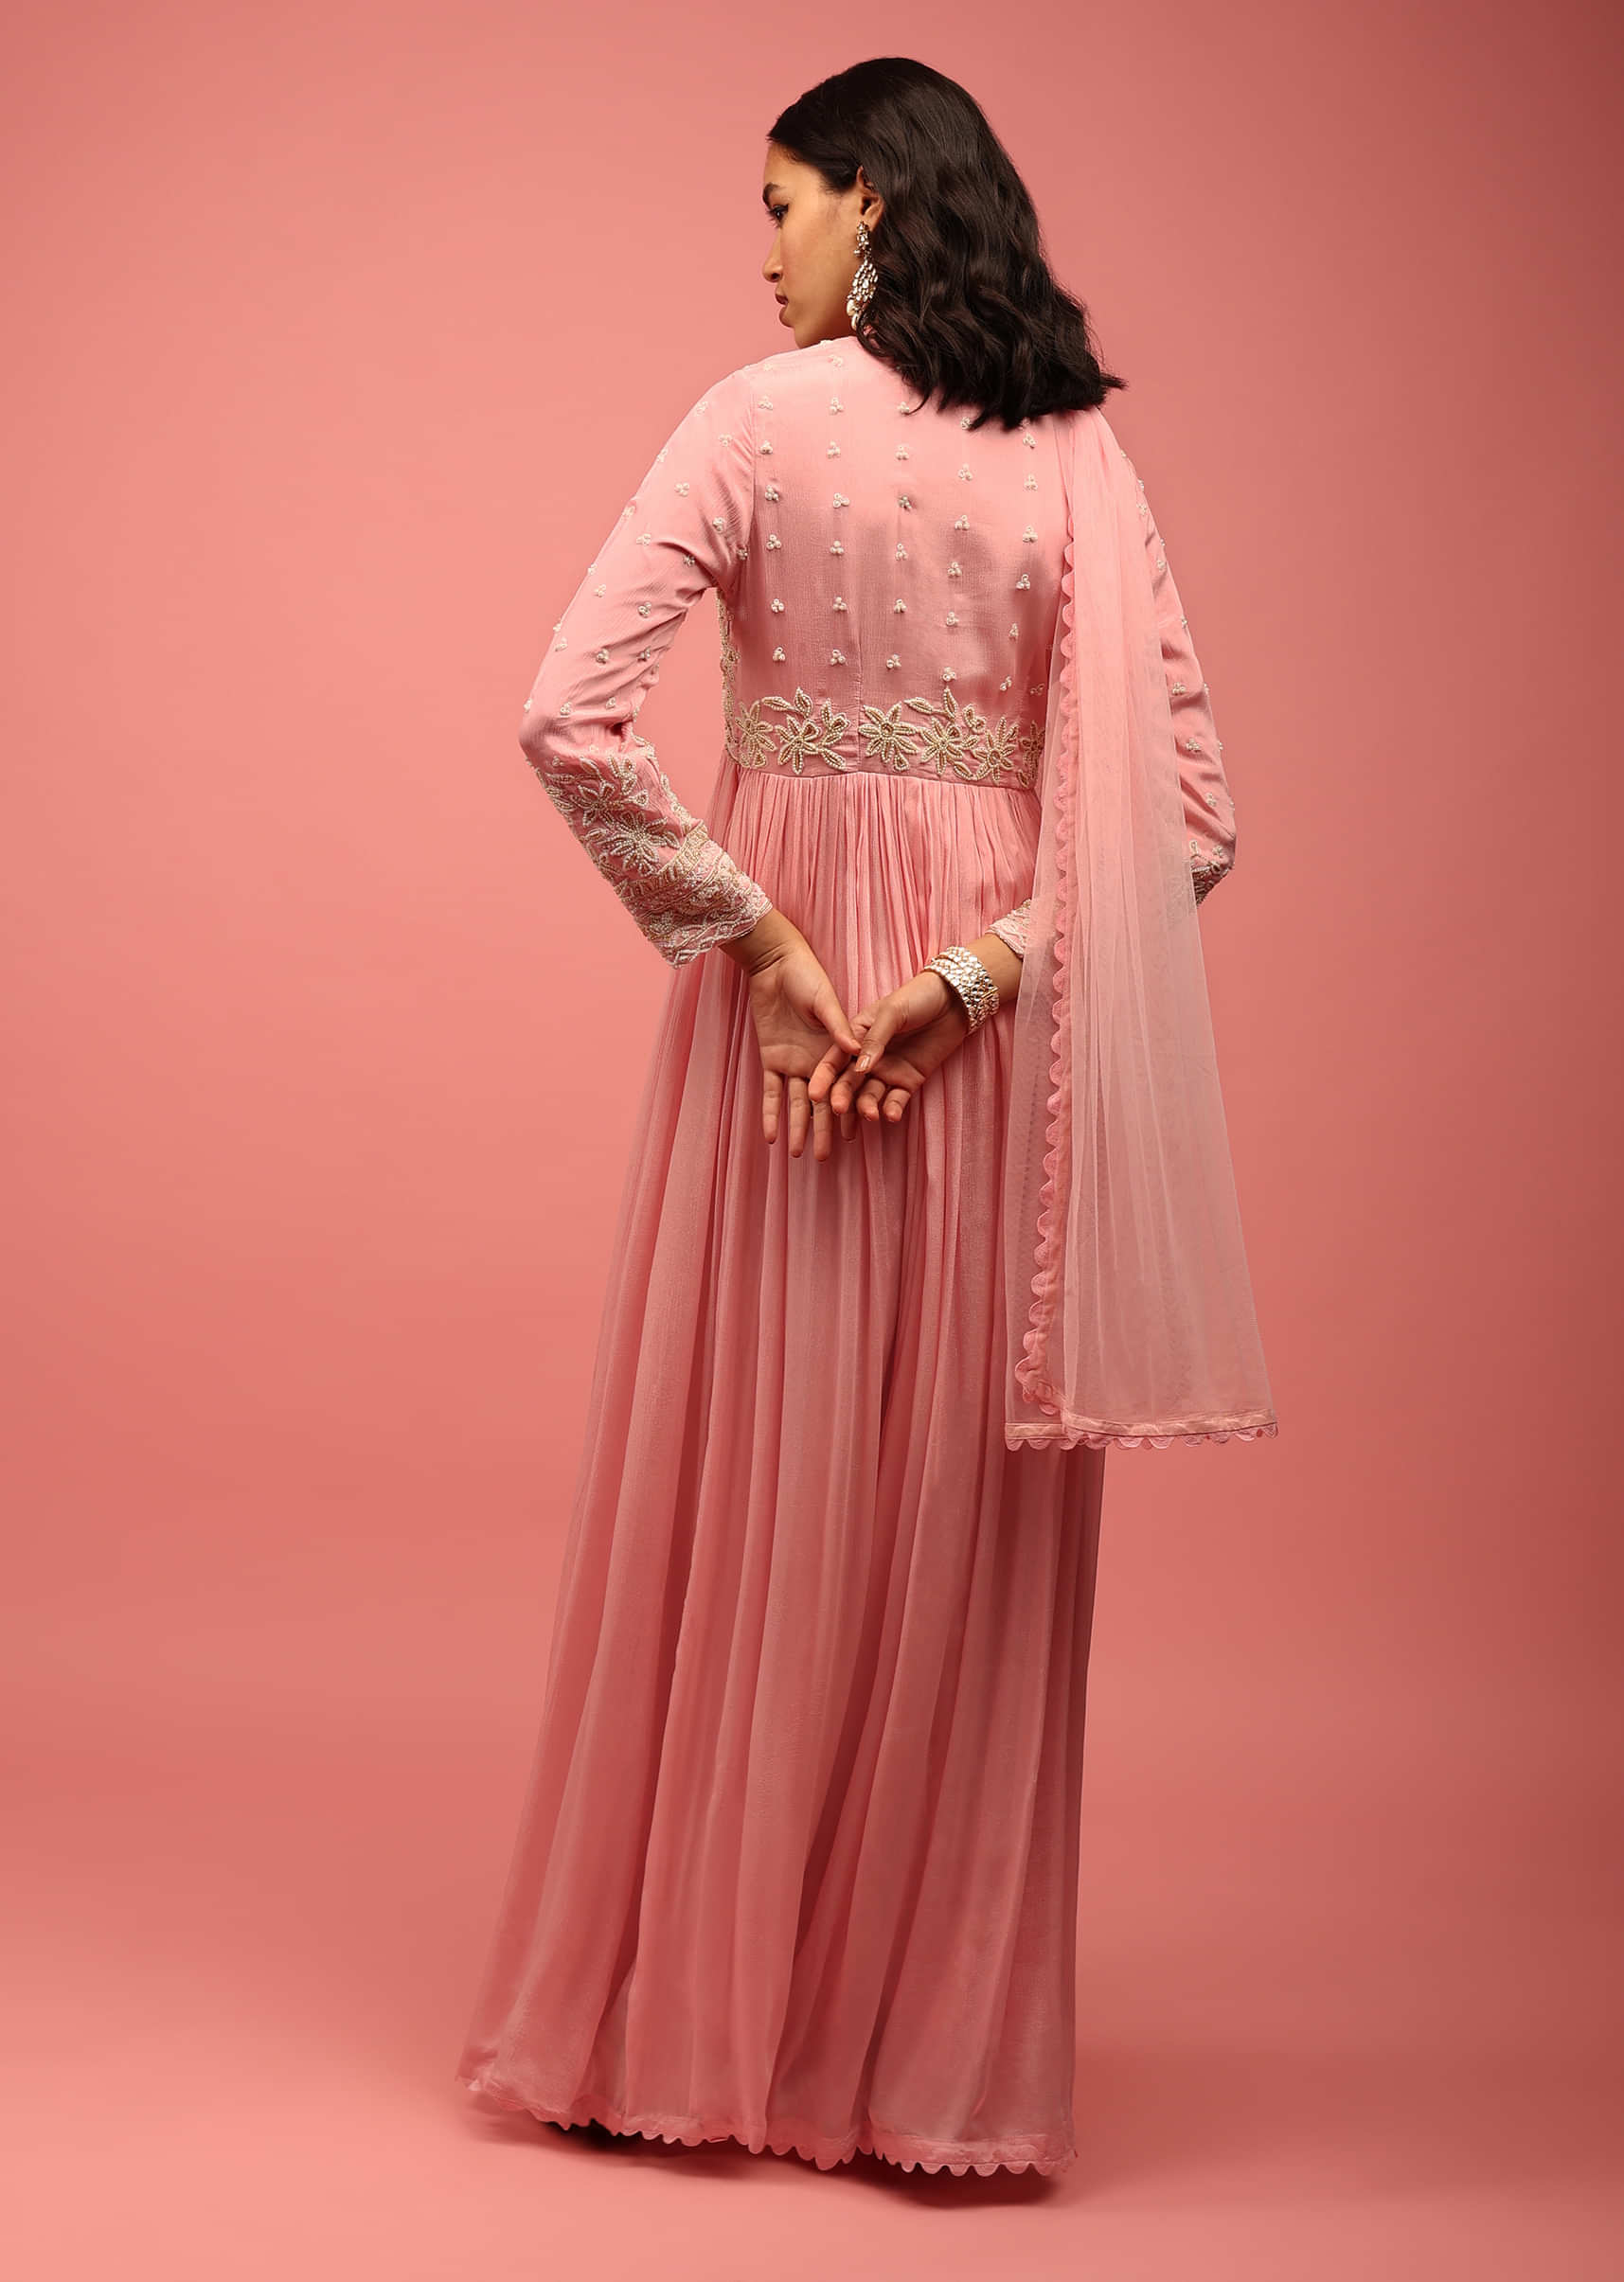 Blush Pink Anarkali Suit In Chiffon With Empire Style Heavily Embroidered Bodice Paired In Moti Work